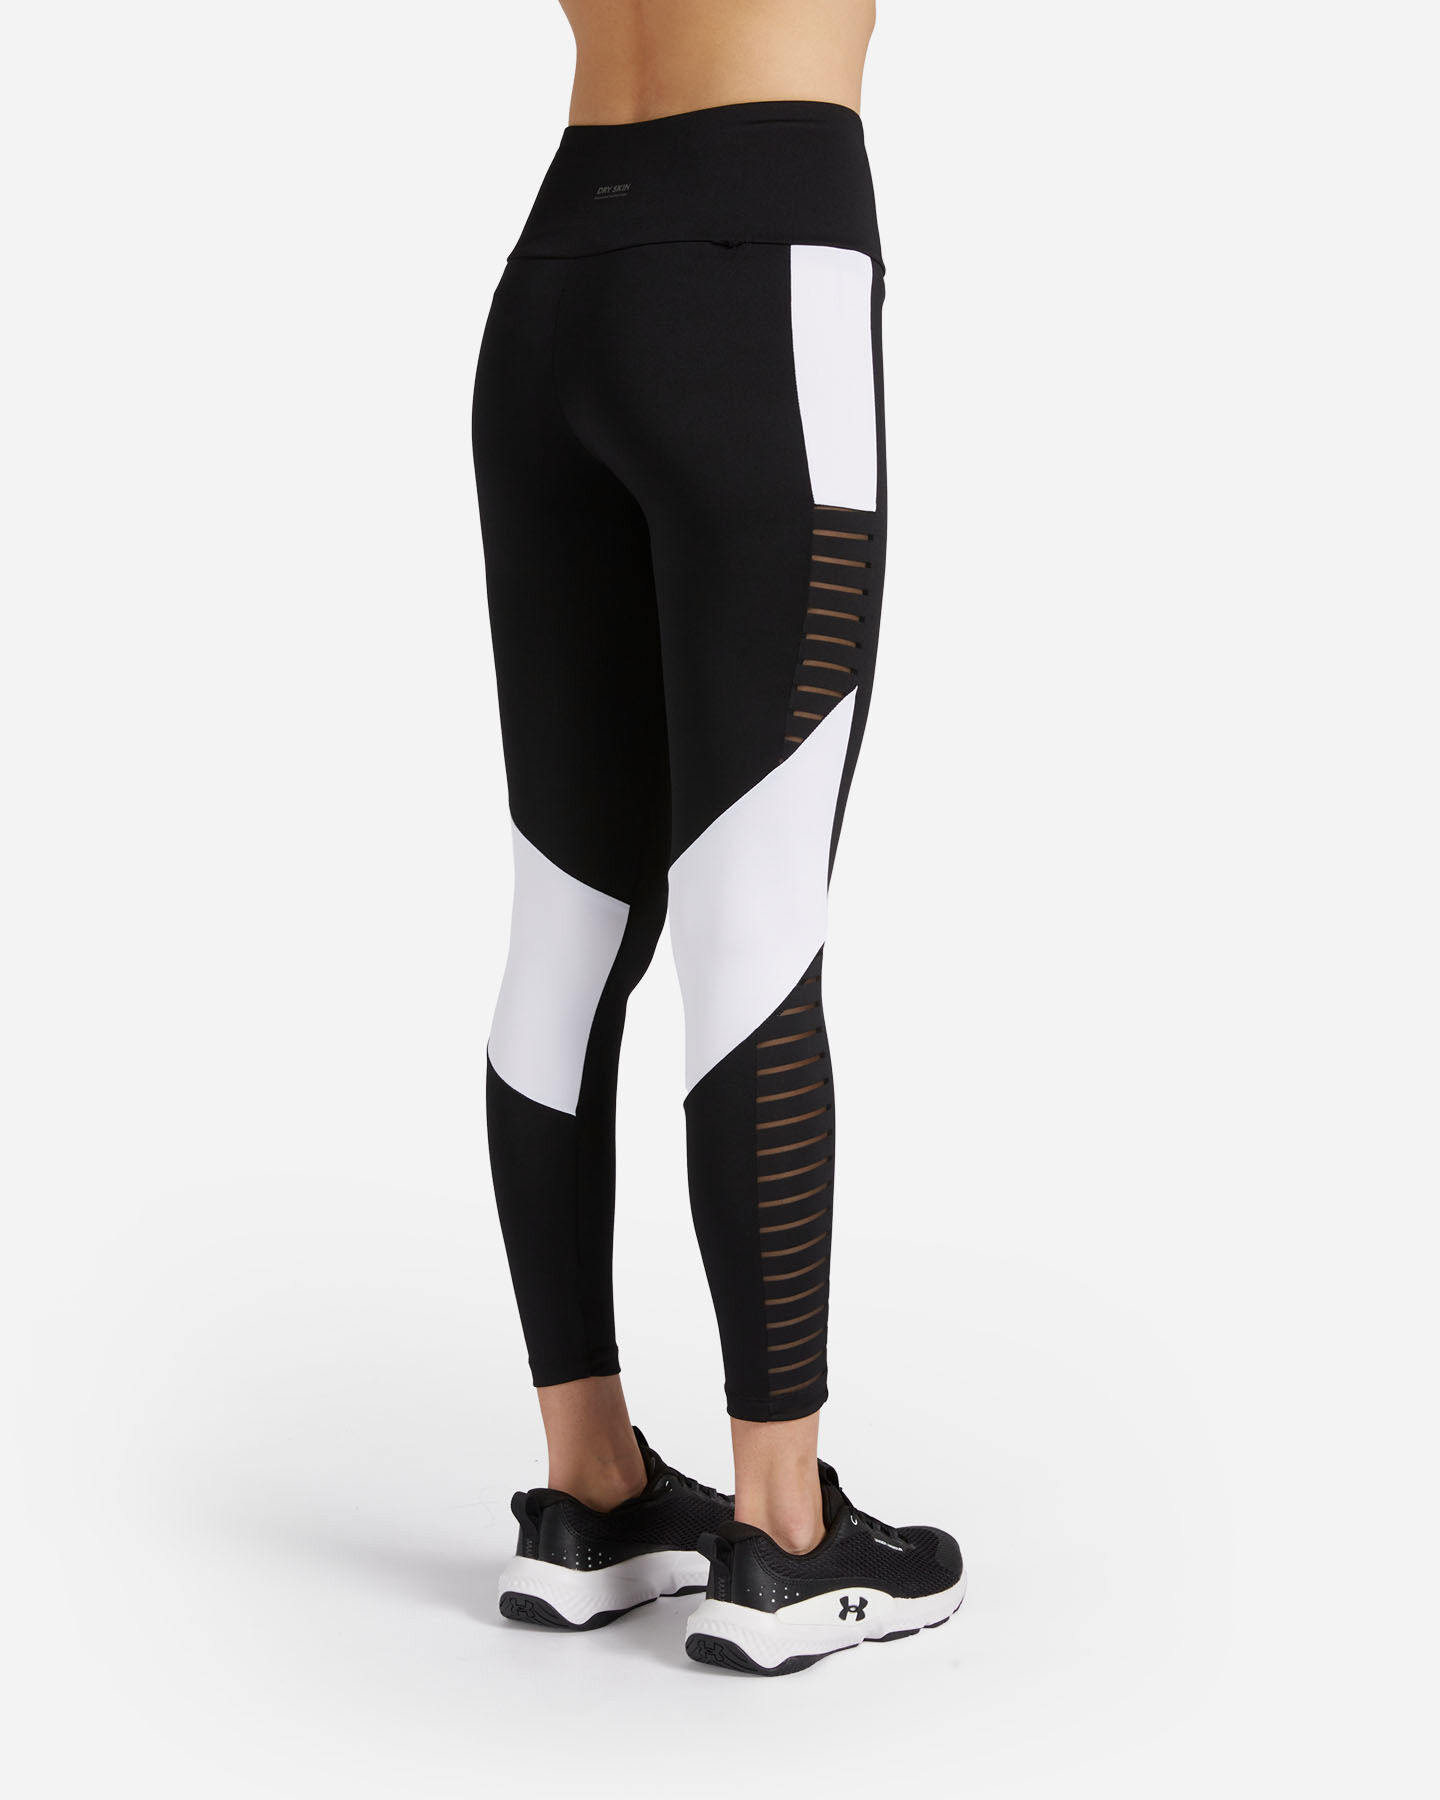  Leggings ARENA PUSH UP W S4131149|050/001|XS scatto 1